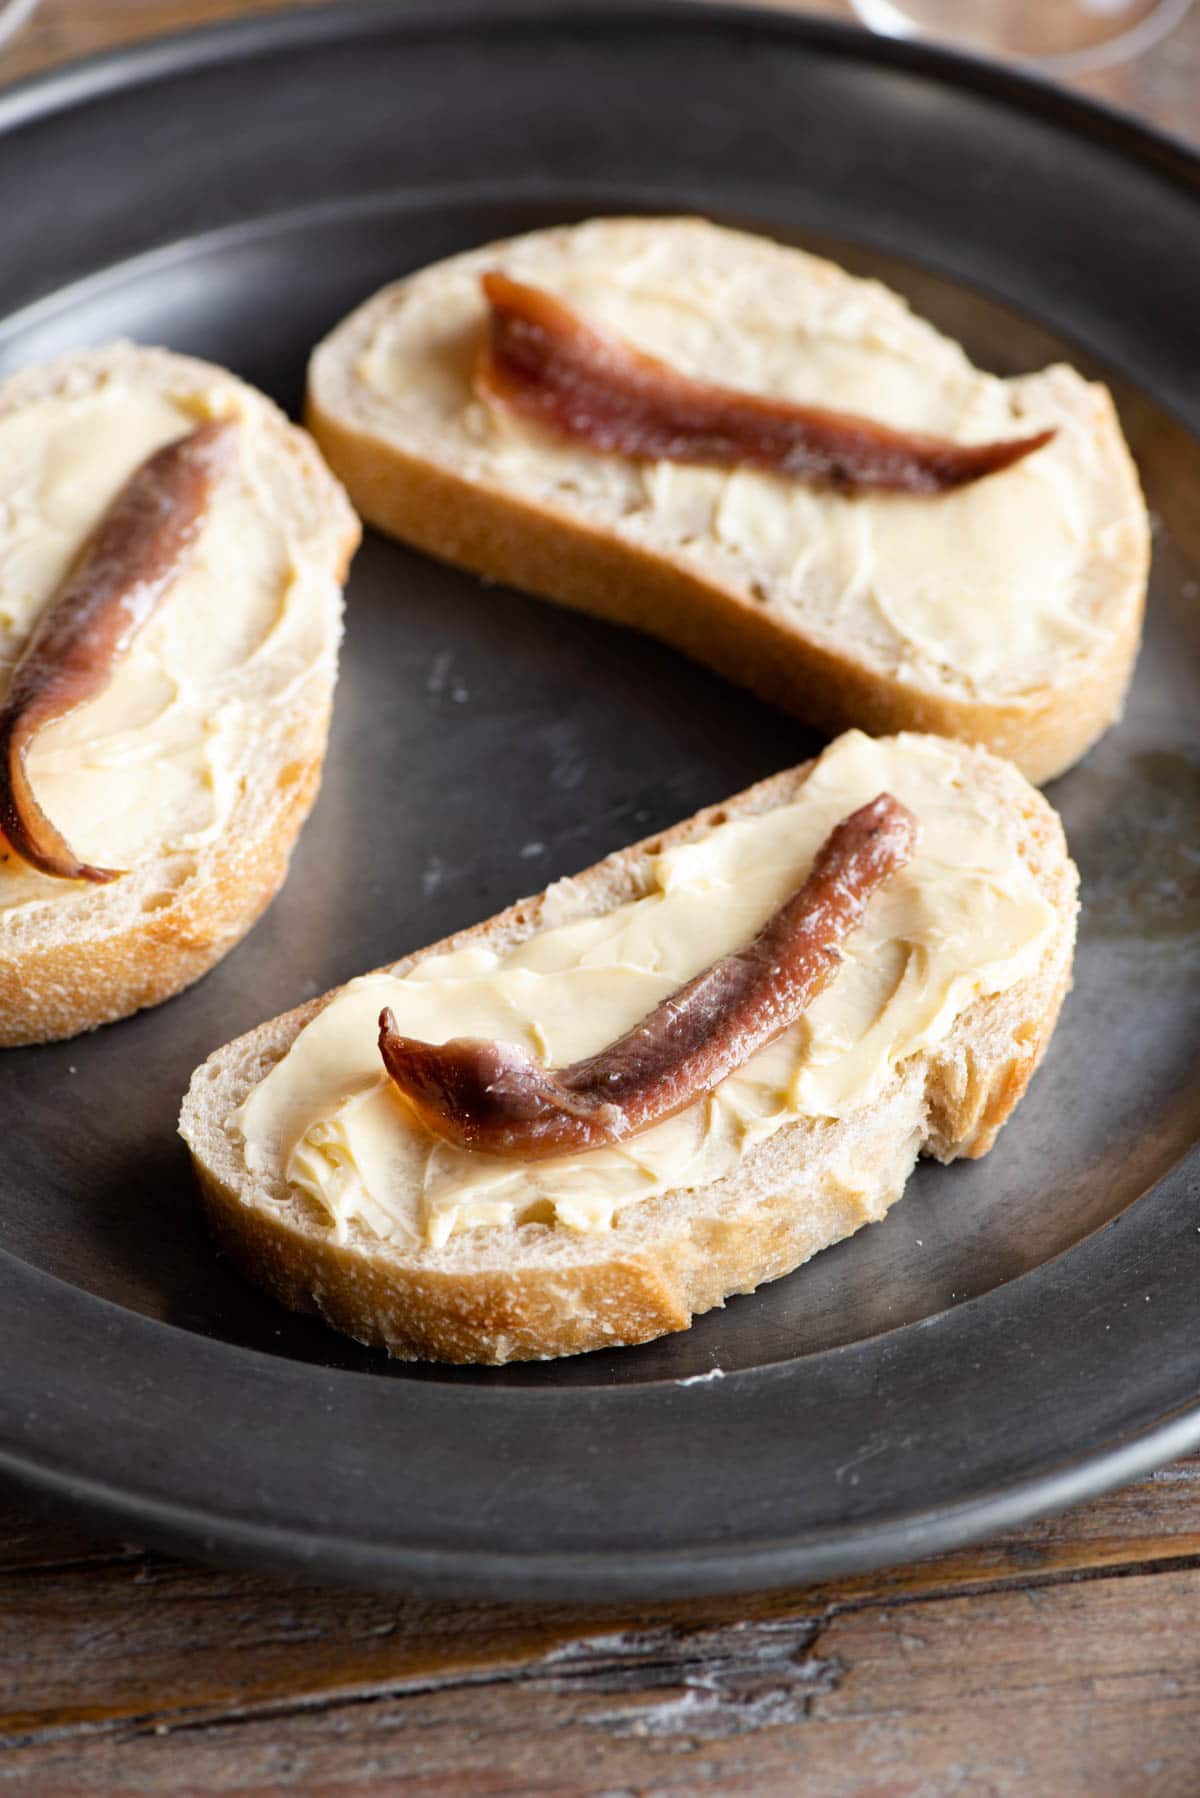 A close up of a slice of bread spread with butter and topped with an anchovy